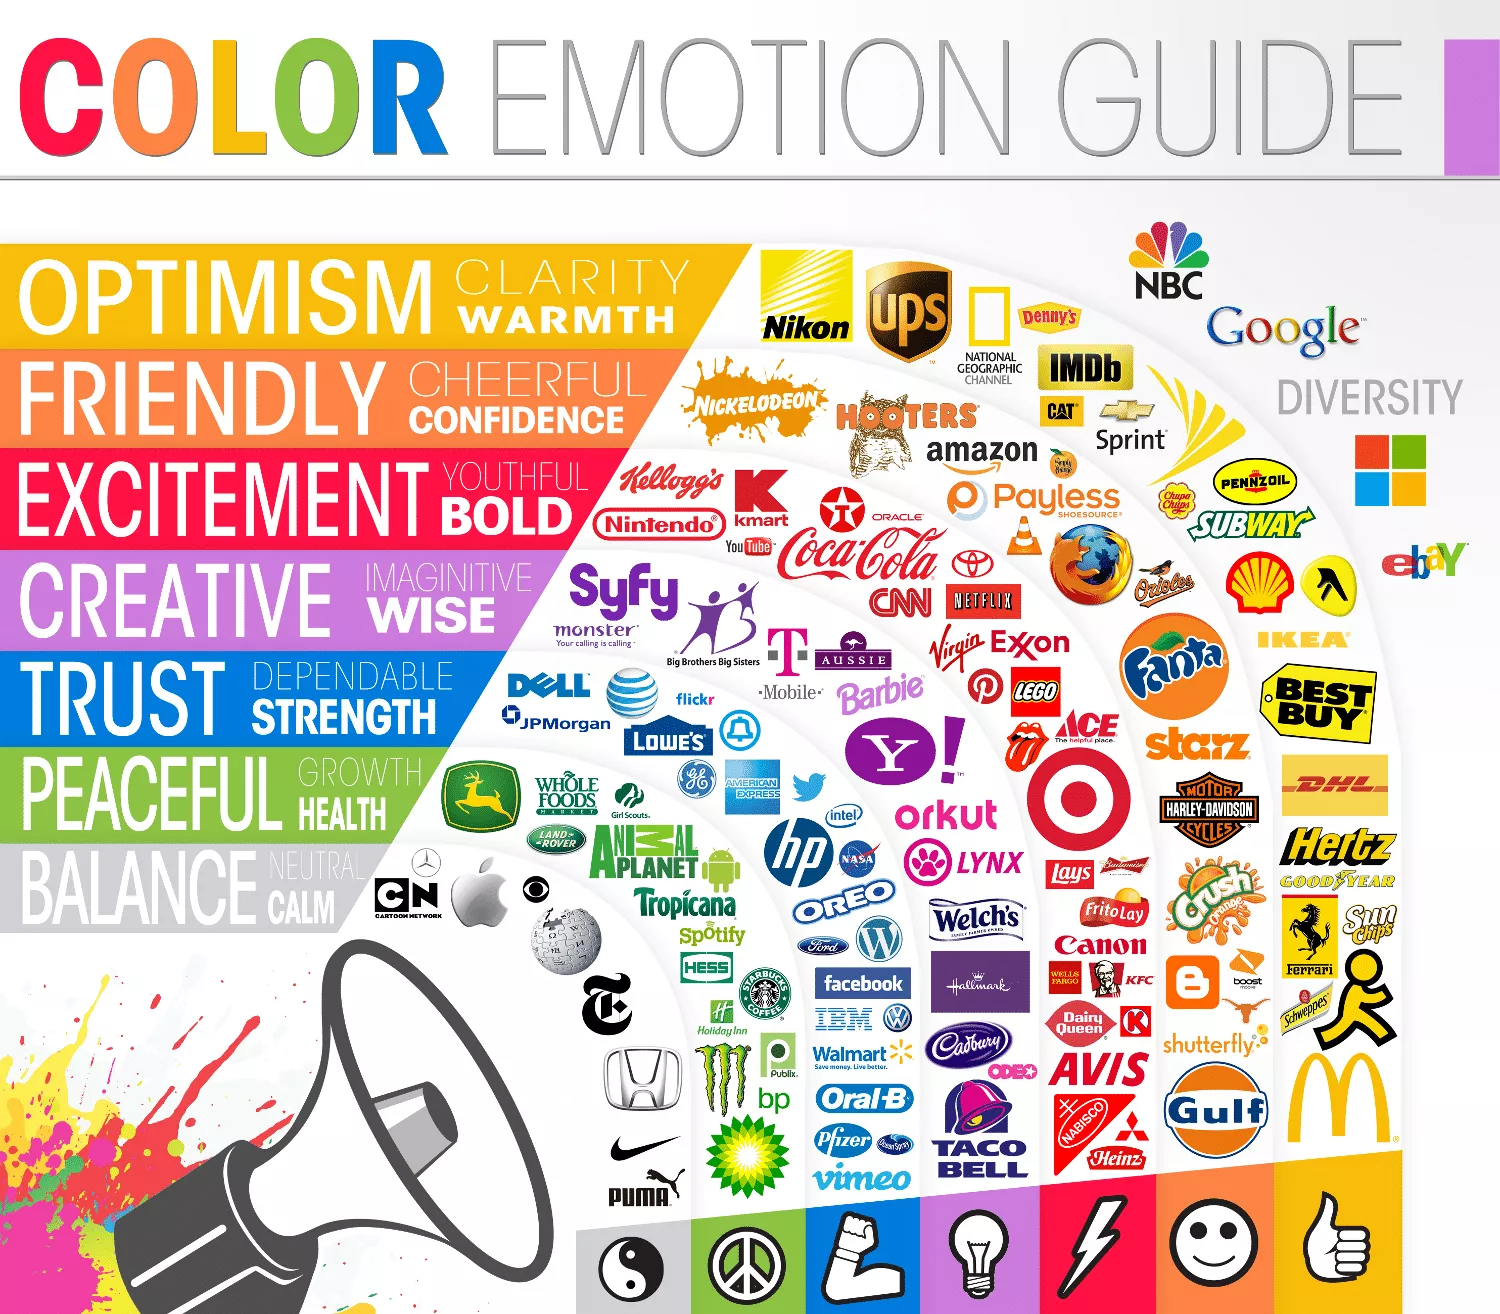 A graphic titled 'Color Emotion Guide', showing brand names grouped by colour, and a description of the emotions they try to evoke with those colours